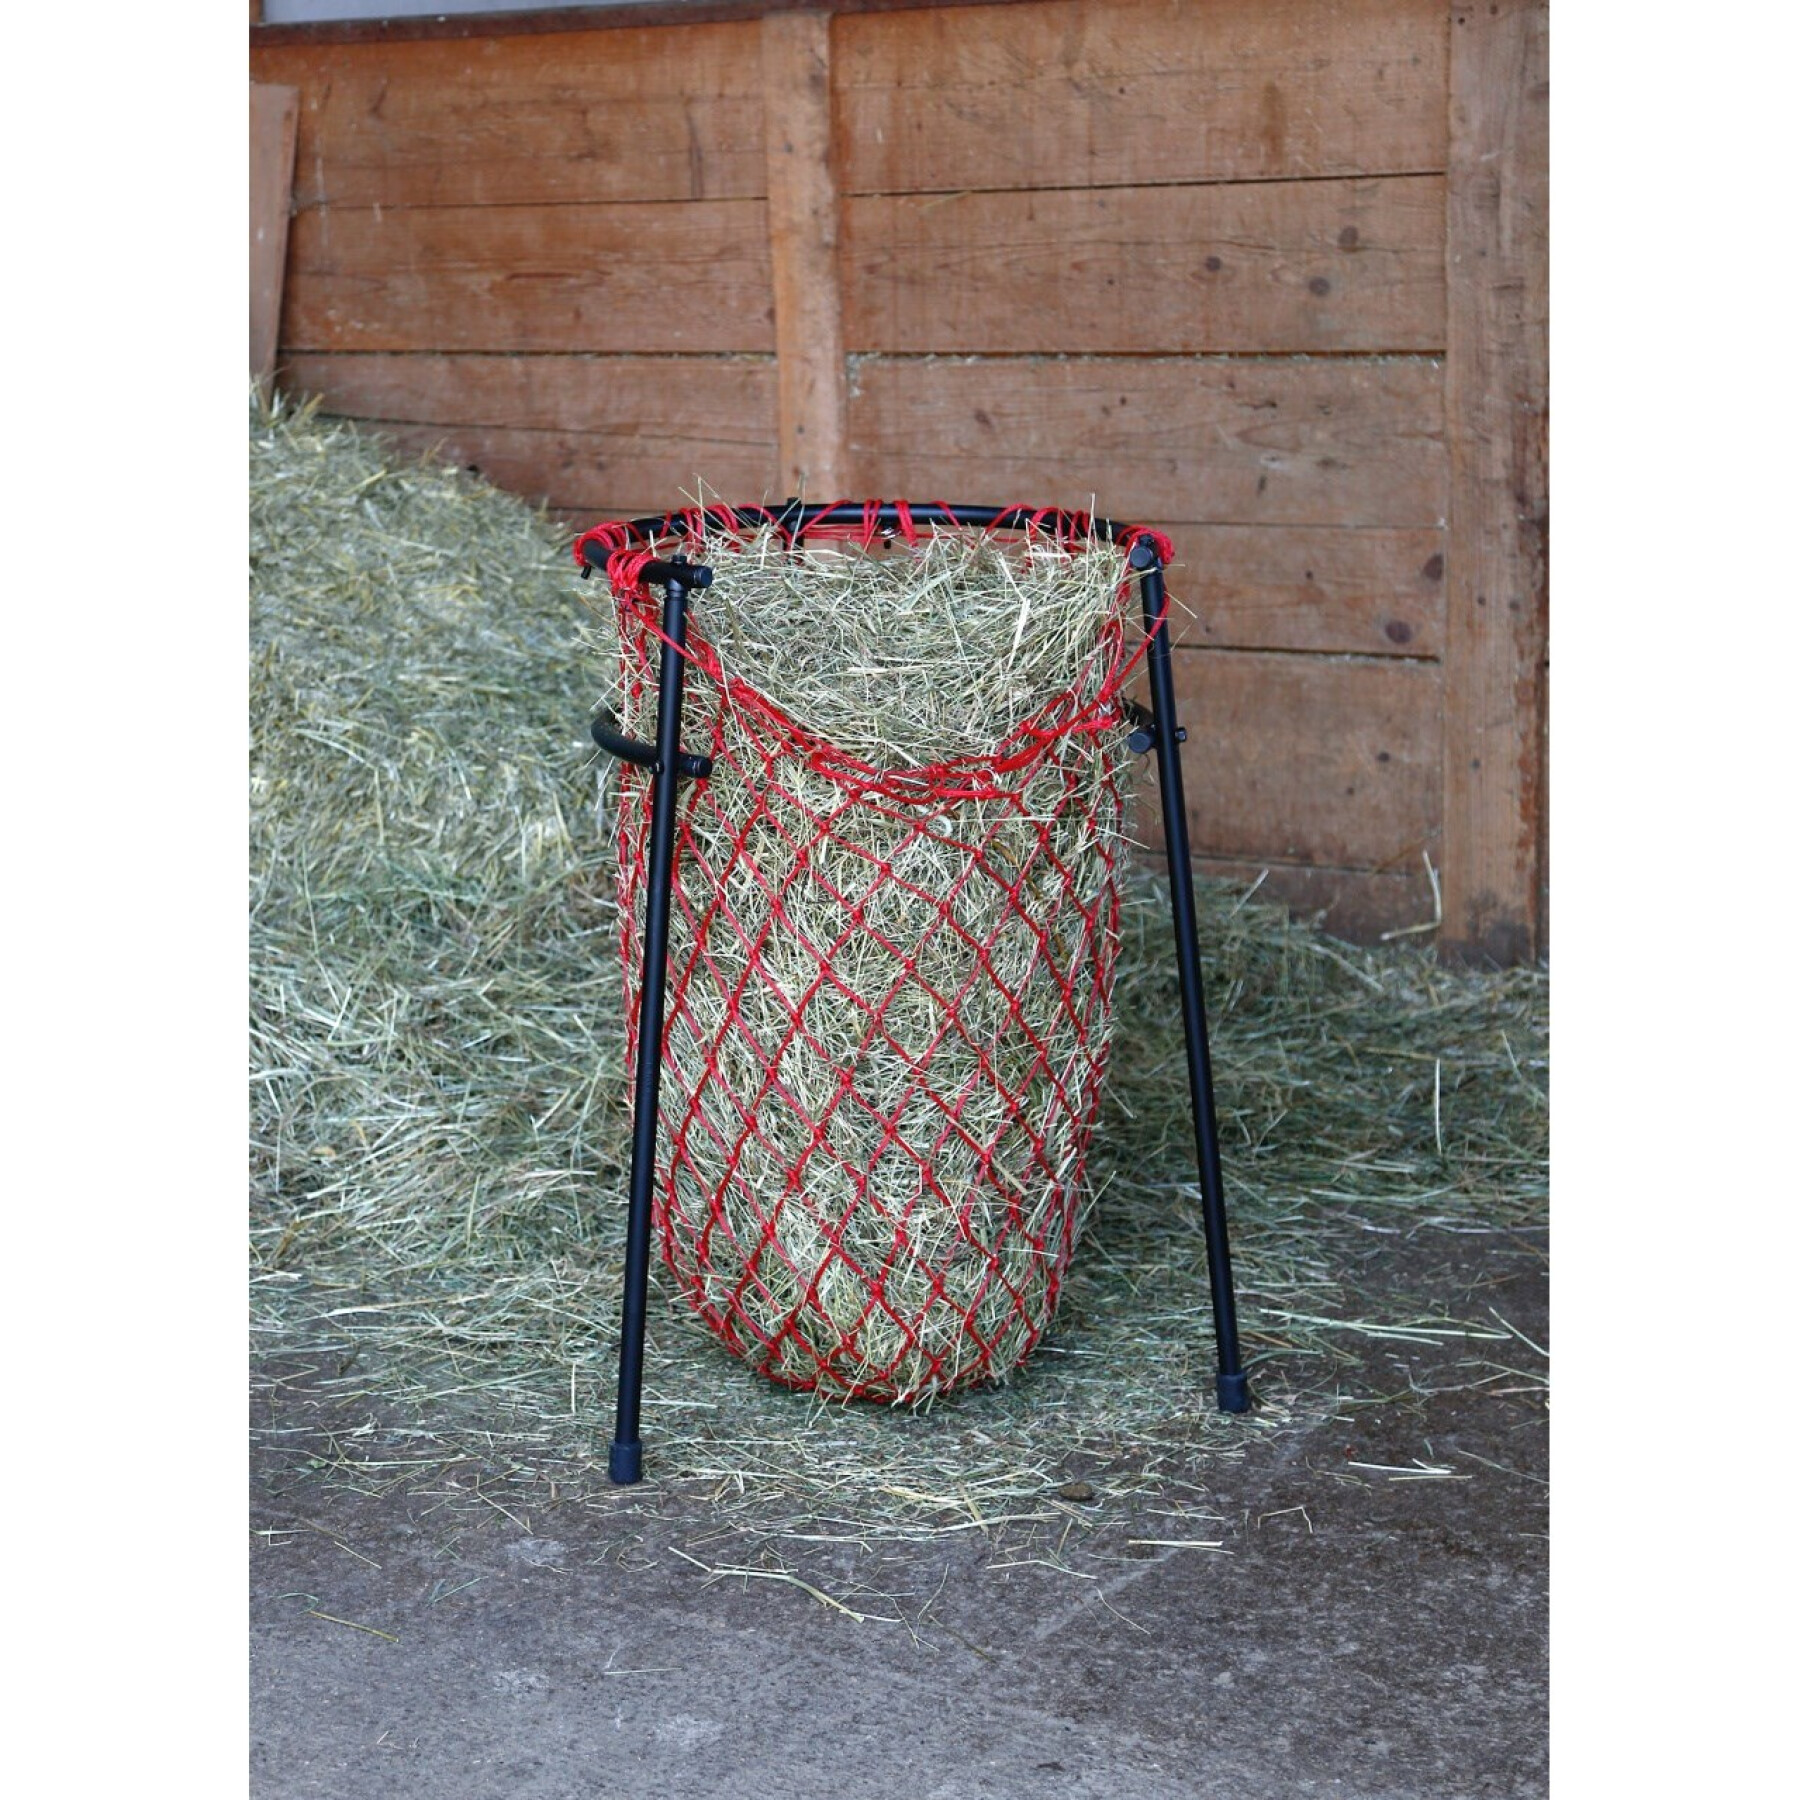 Support for filling hay nets Kerbl